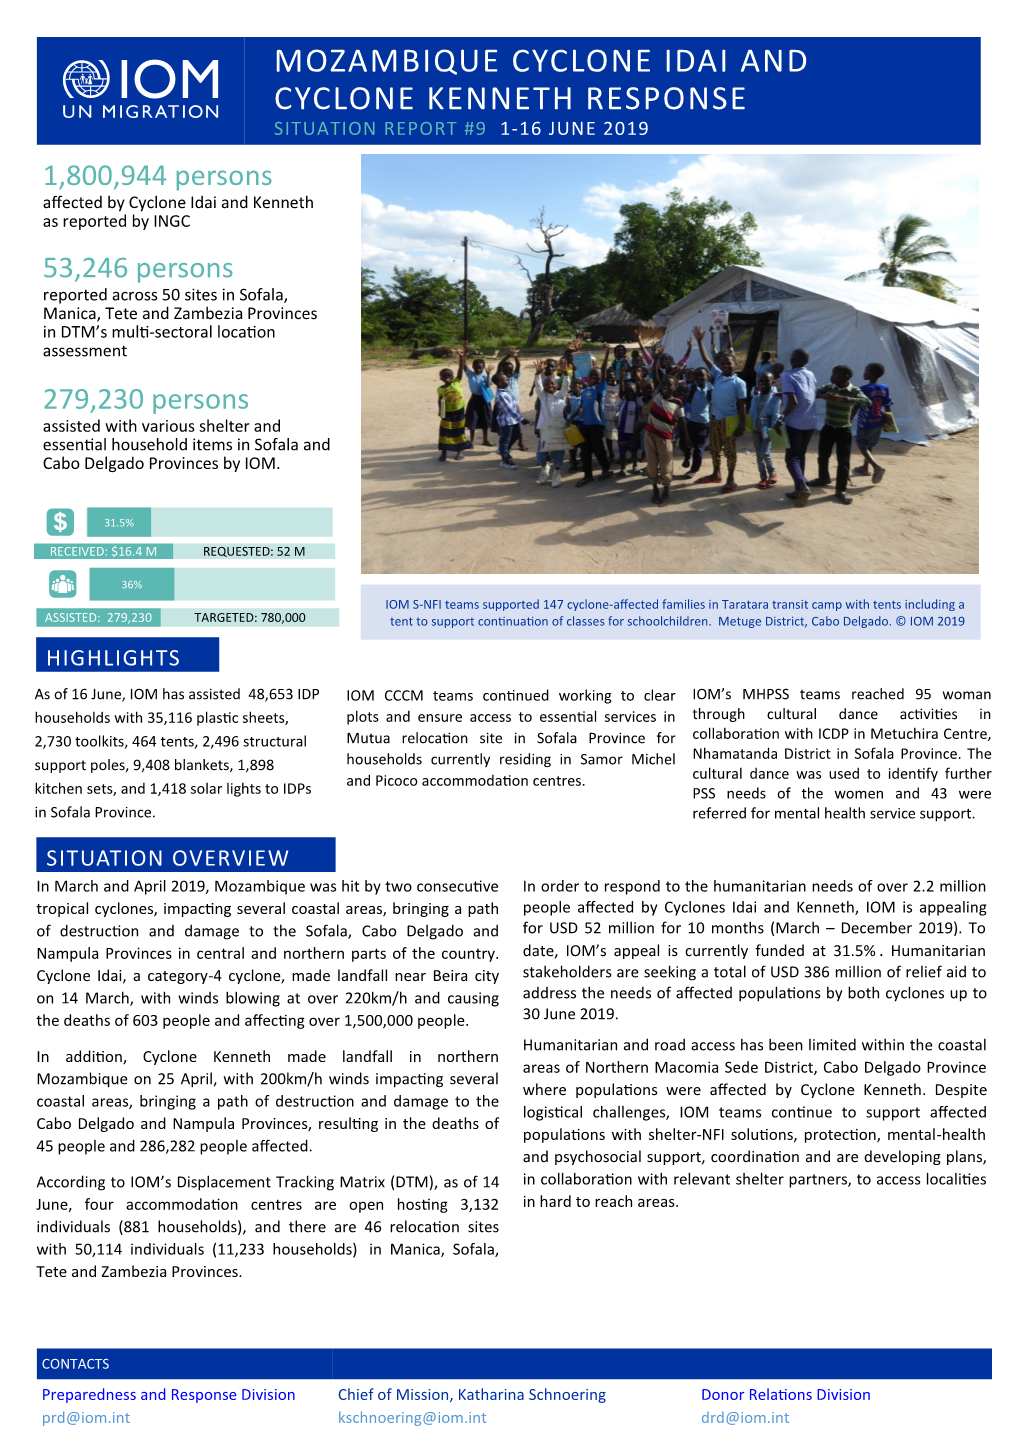 MOZAMBIQUE CYCLONE IDAI and CYCLONE KENNETH RESPONSE SITUATION REPORT #9 1-16 JUNE 2019 1,800,944 Persons Affected by Cyclone Idai and Kenneth As Reported by INGC